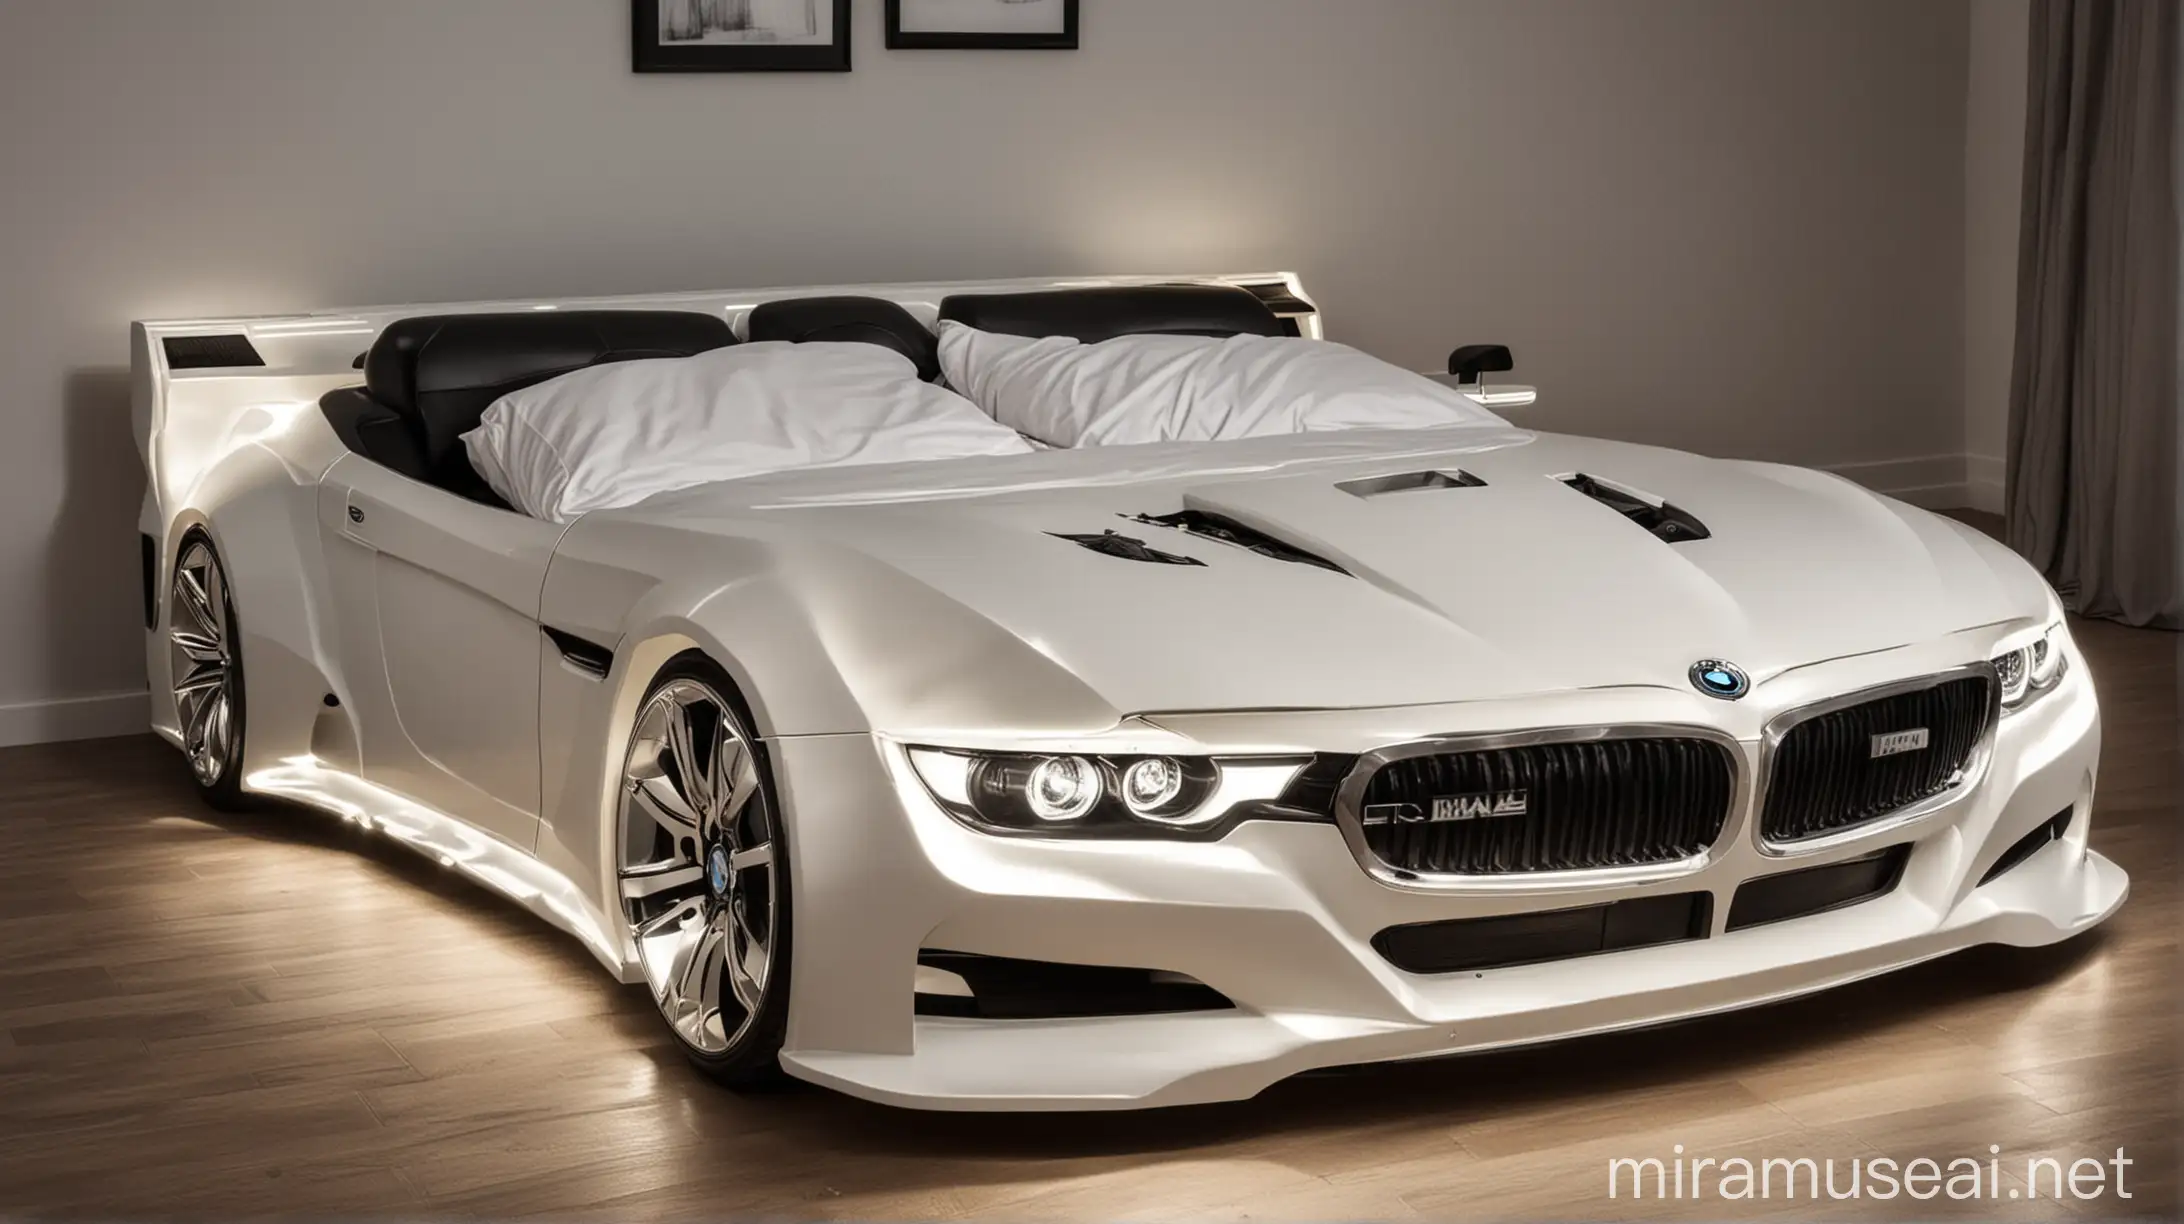 Double bed in the shape of a BMW  car with headlights on